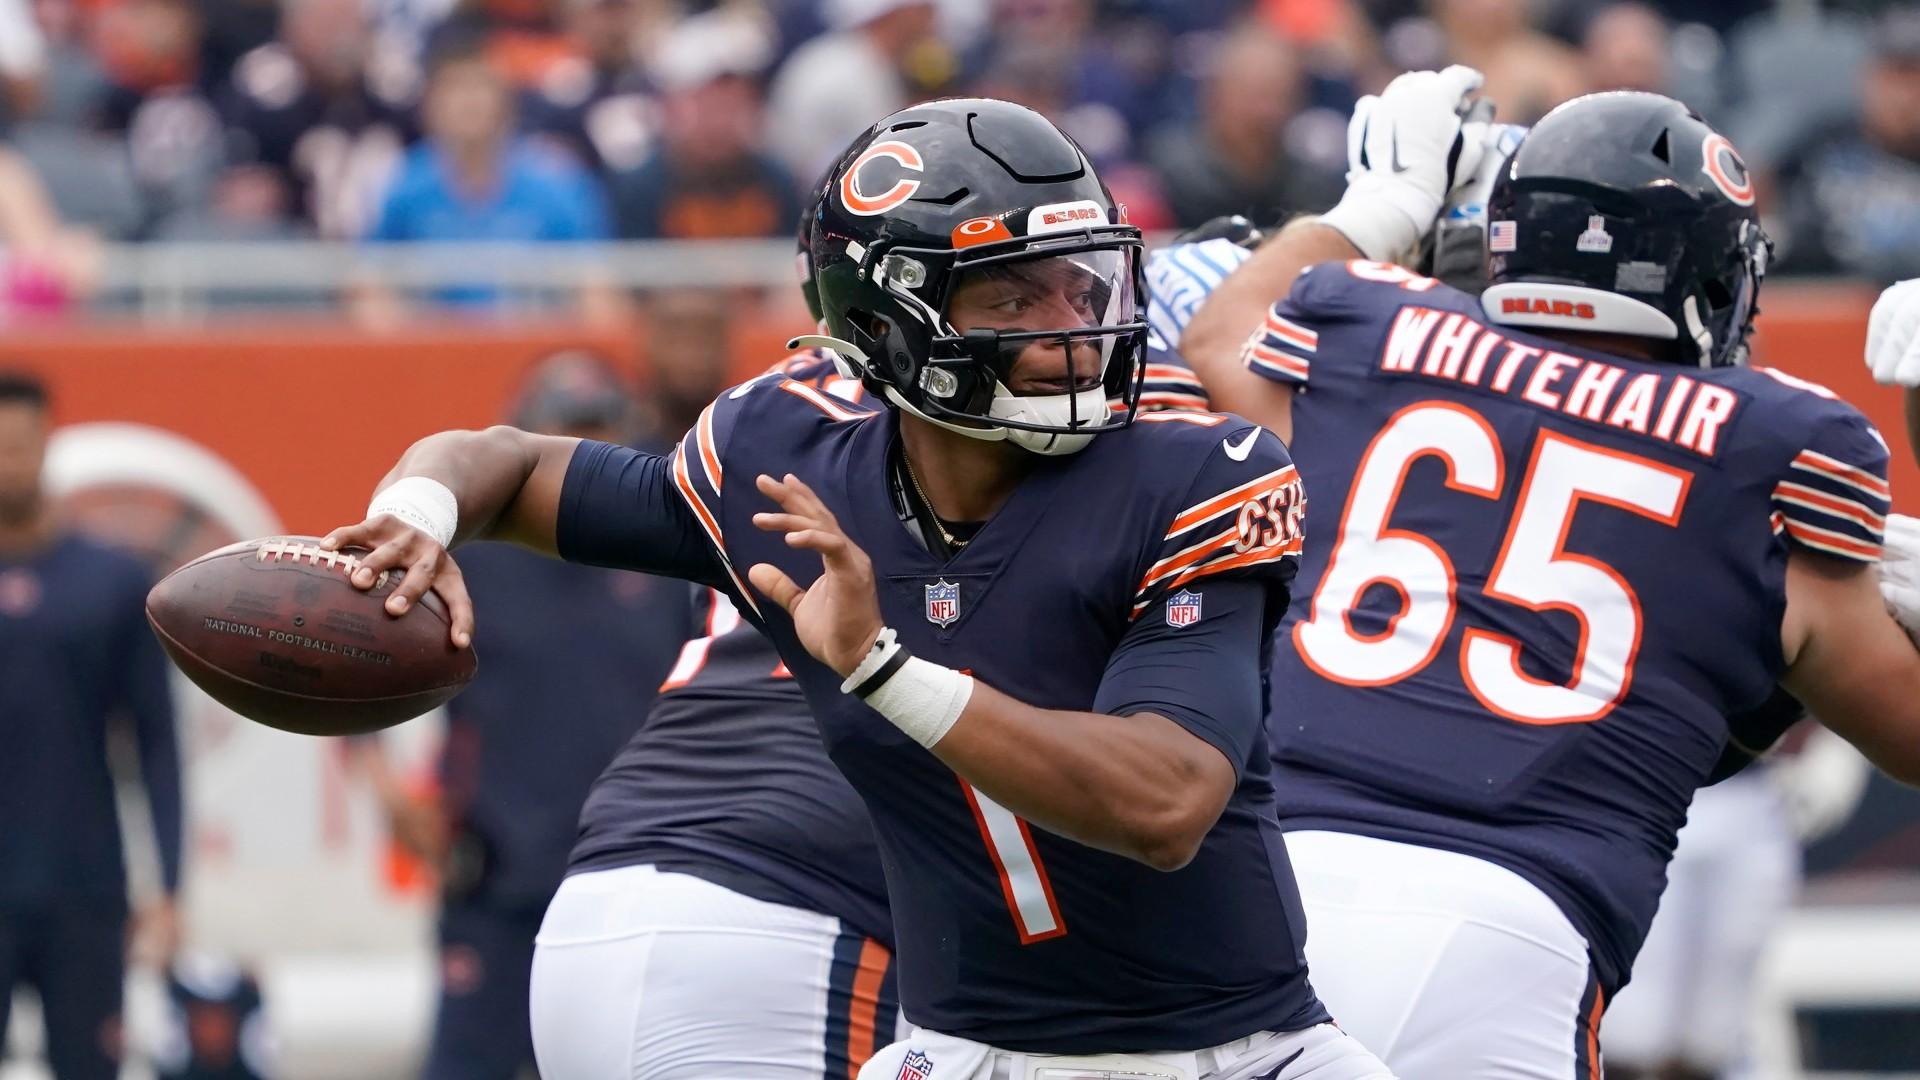 Chicago Bears quarterback Justin Fields passes during the first half of an NFL football game against the Detroit Lions Sunday, Oct. 3, 2021, in Chicago. (AP Photo / David Banks)